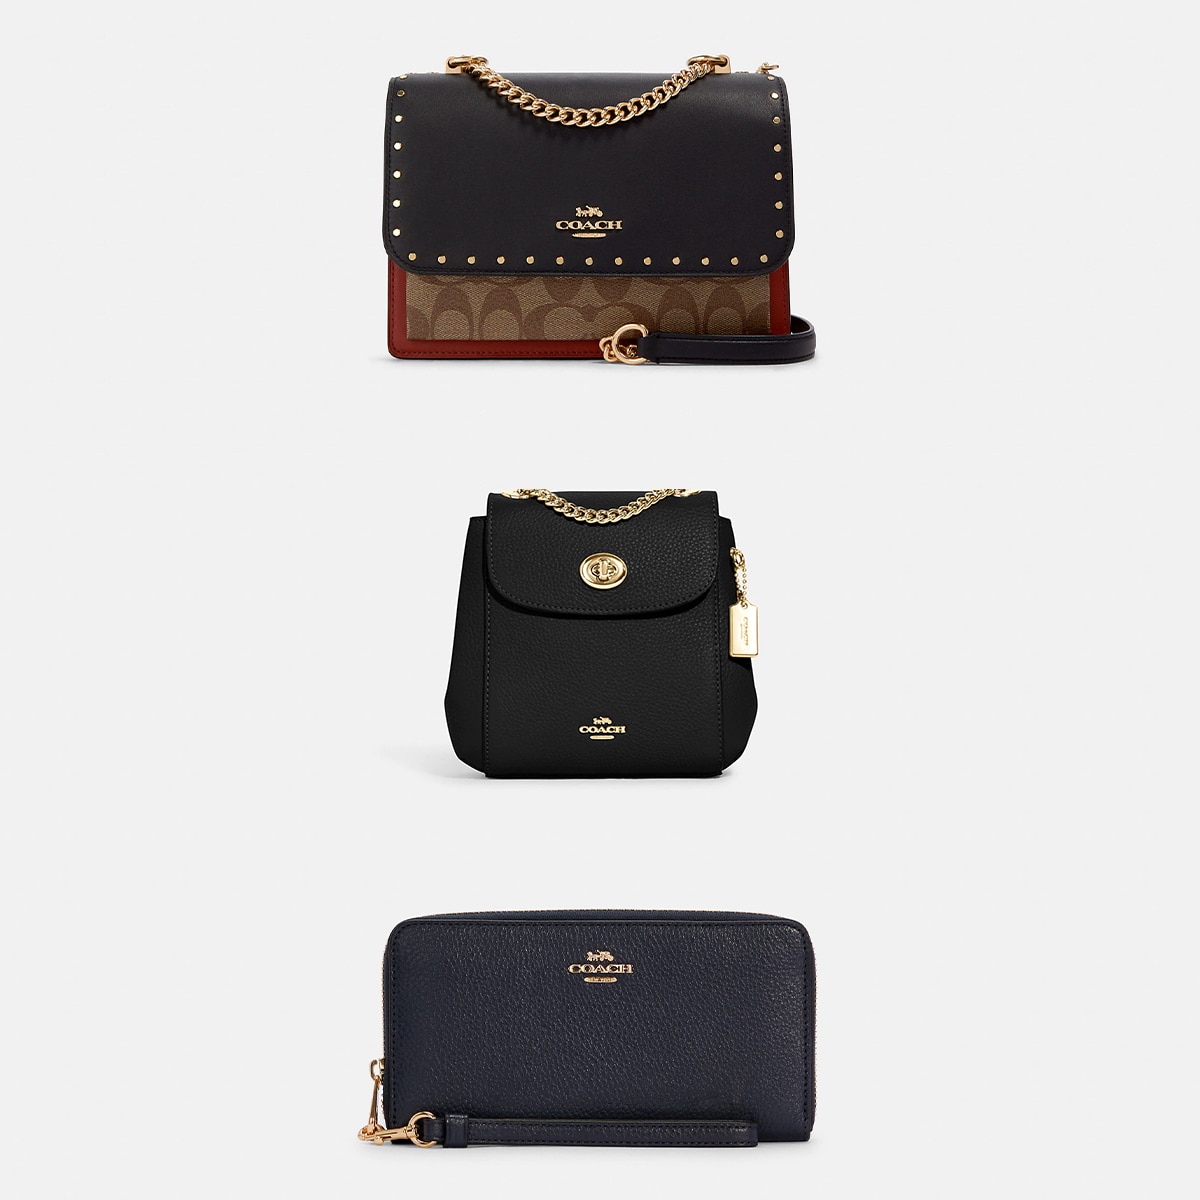 Boxing Day 2021: Coach Outlet bags are up to 70% off, including these 11  best-sellers